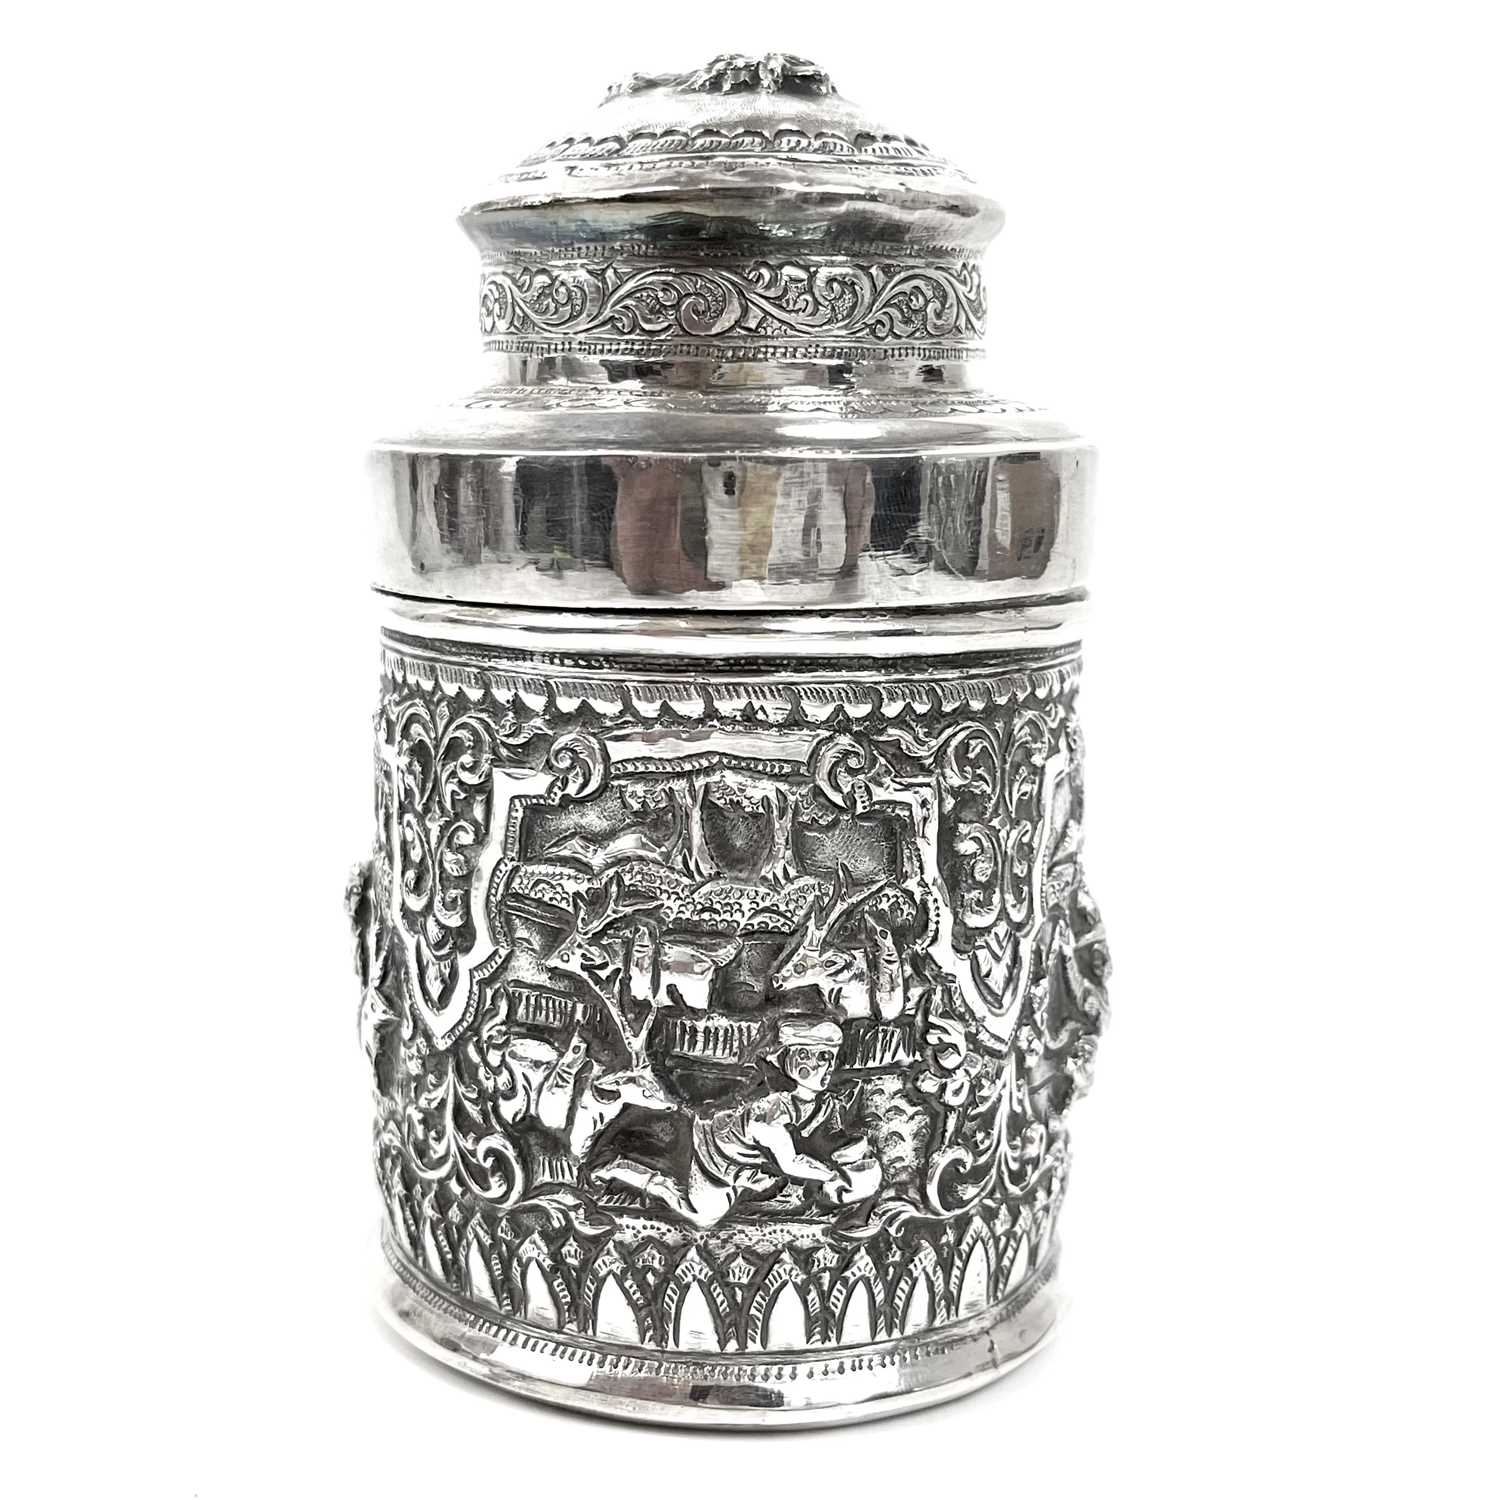 Two Burmese silver lidded cannisters, mid 20th century - Image 10 of 25